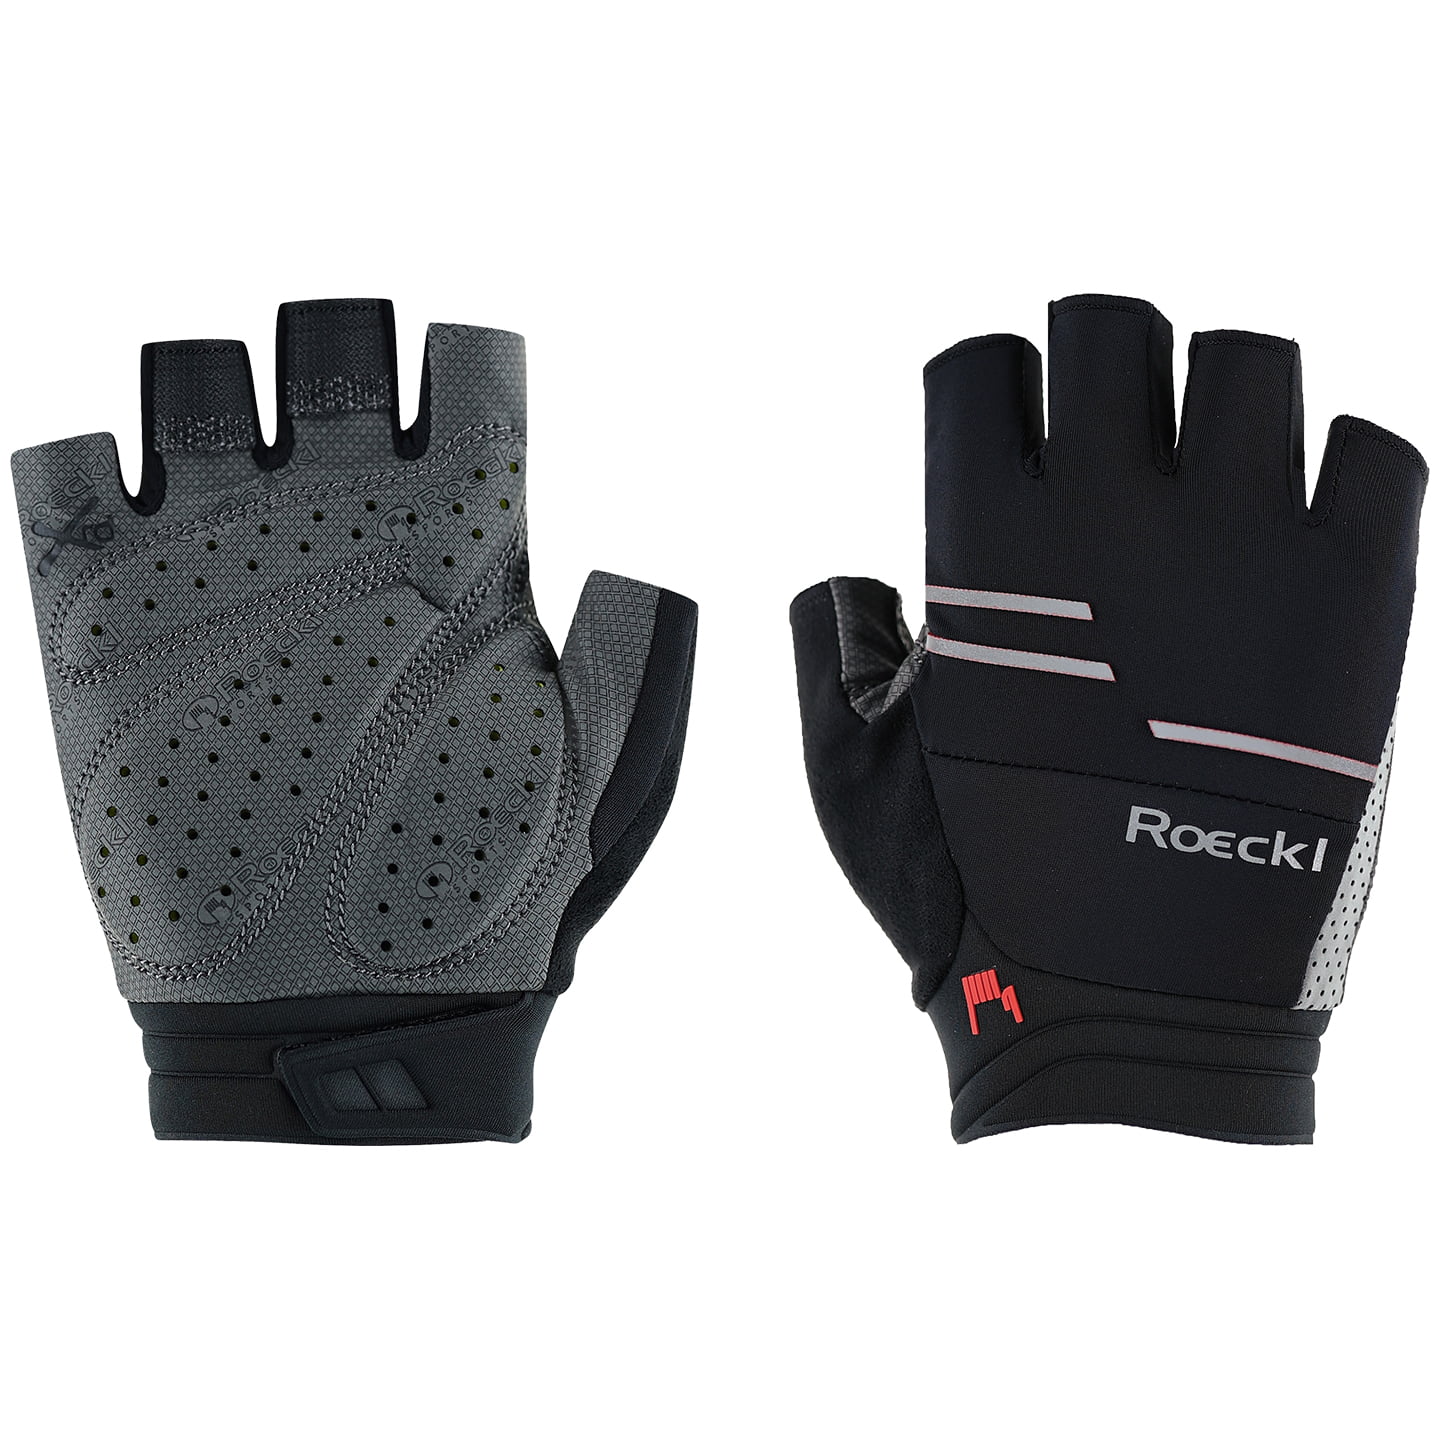 ROECKL Iguna Gloves, for men, size 7, Cycling gloves, Cycling clothes